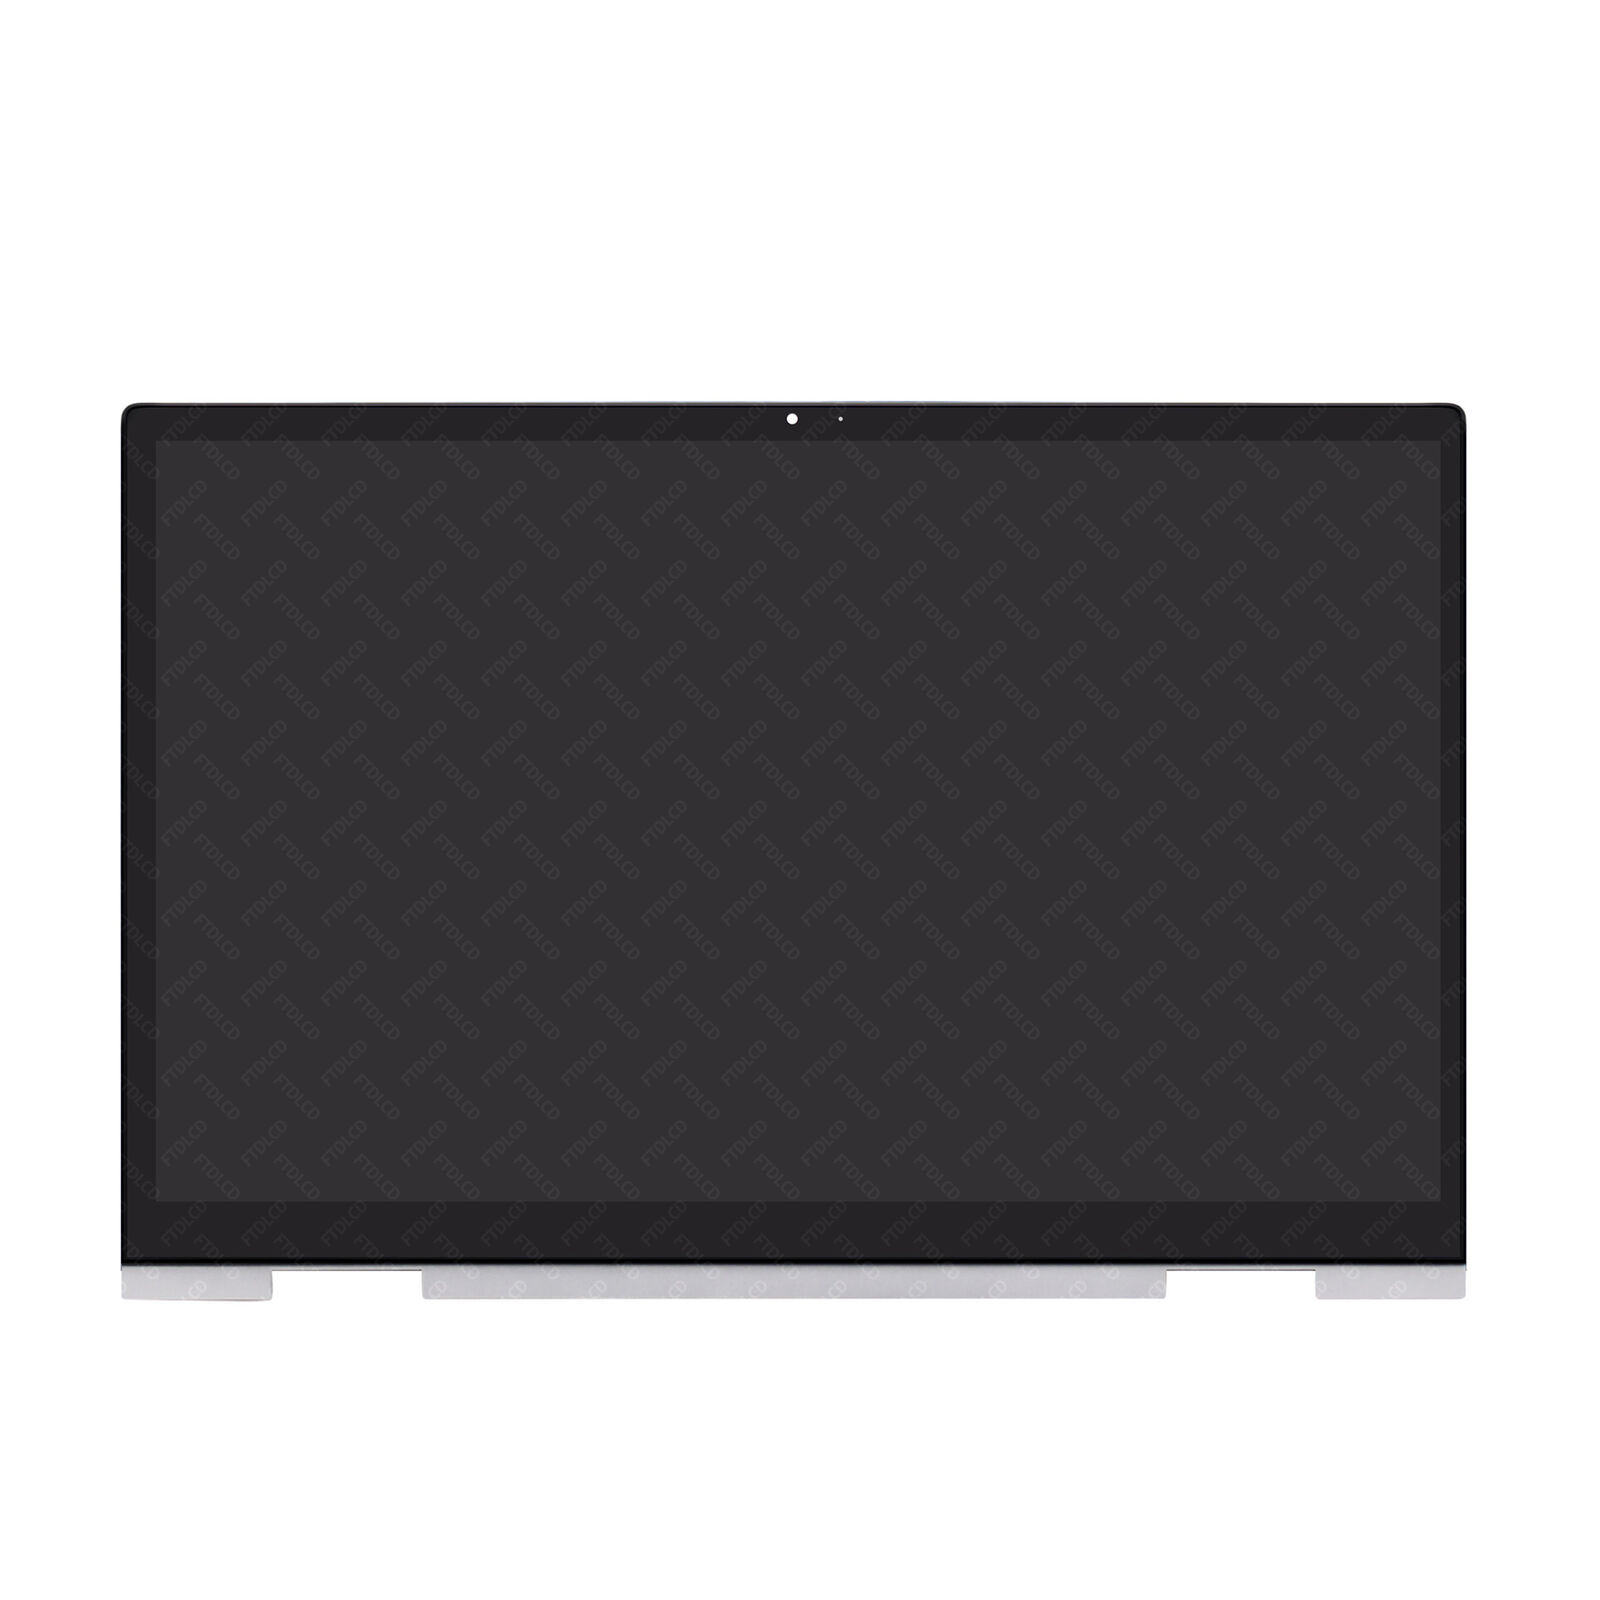 N10353-001 15.6''LCD Touchscreen Digitizer Assembly for HP ENVY x360 15-ew0023dx